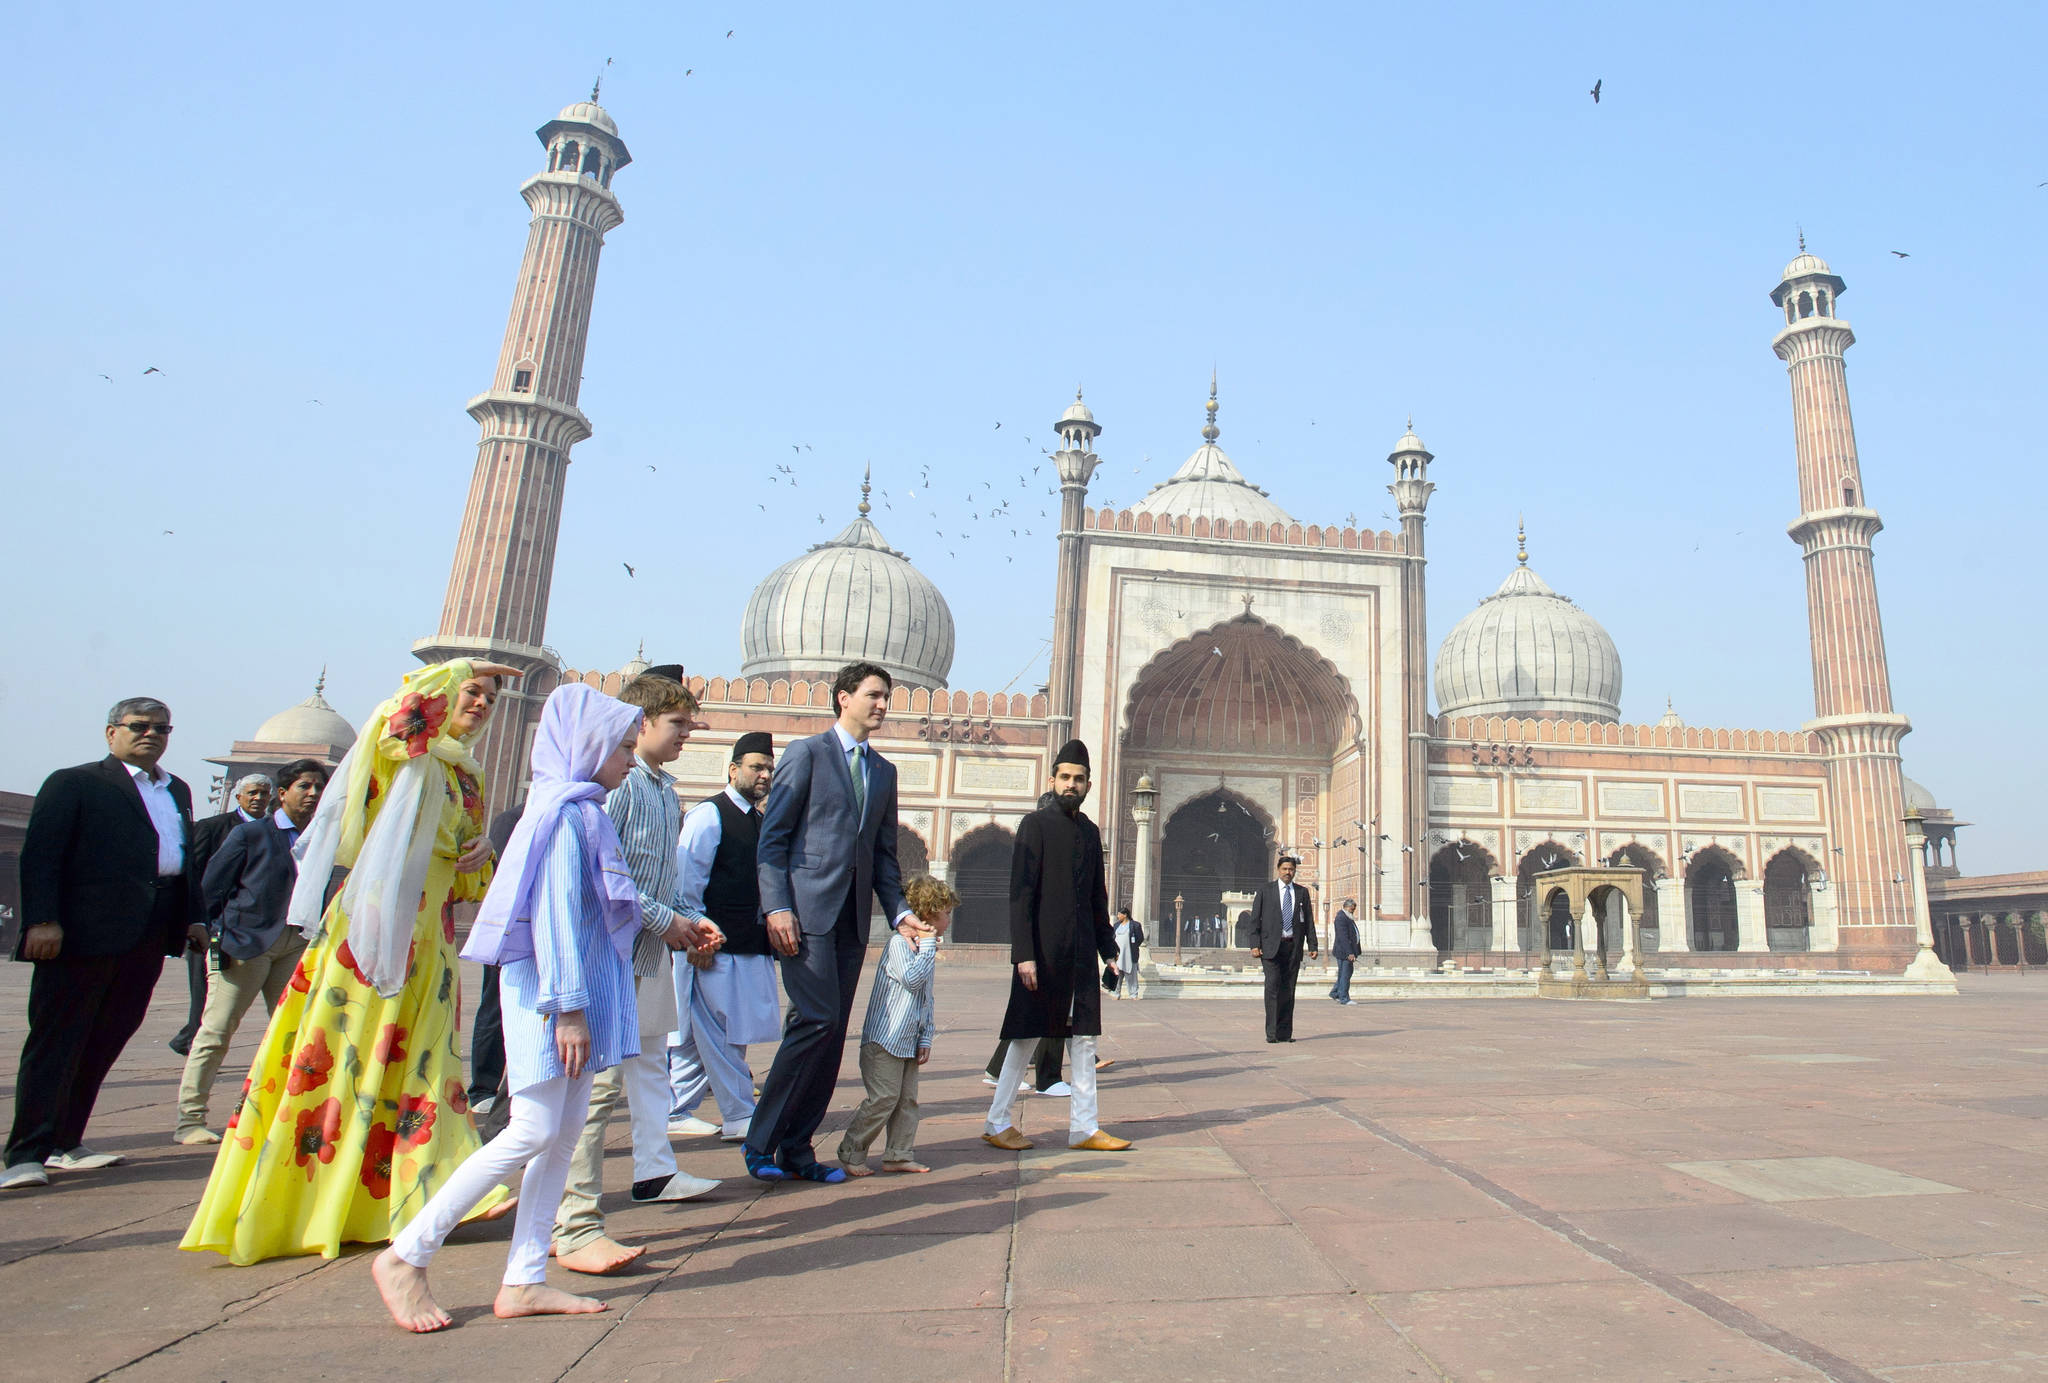 Canadian Prime Minister Justin Trudeau and wife Sophie Gregoire Trudeau, and children, Xavier, 10, Ella-Grace, 9, and Hadrien, 3, visit the Jama Masjid mosque in New Delhi, India, Thursday, Feb. 22. (Sean Kilpatrick/The Canadian Press)